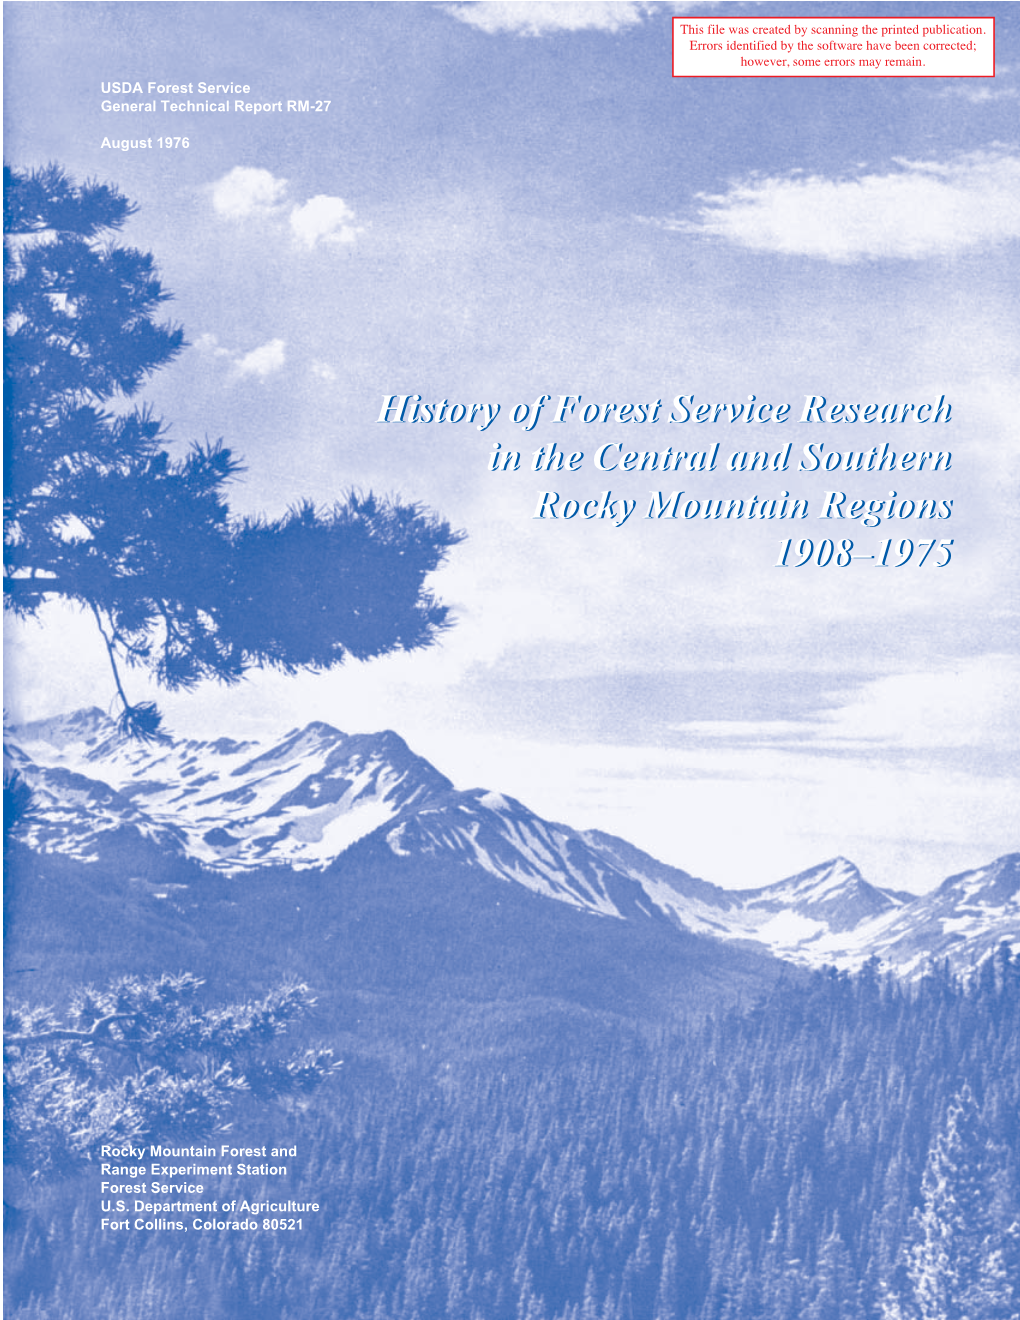 History of Forest Service Research in the Central and Southern Rocky Mountain Regions, 1908-1975